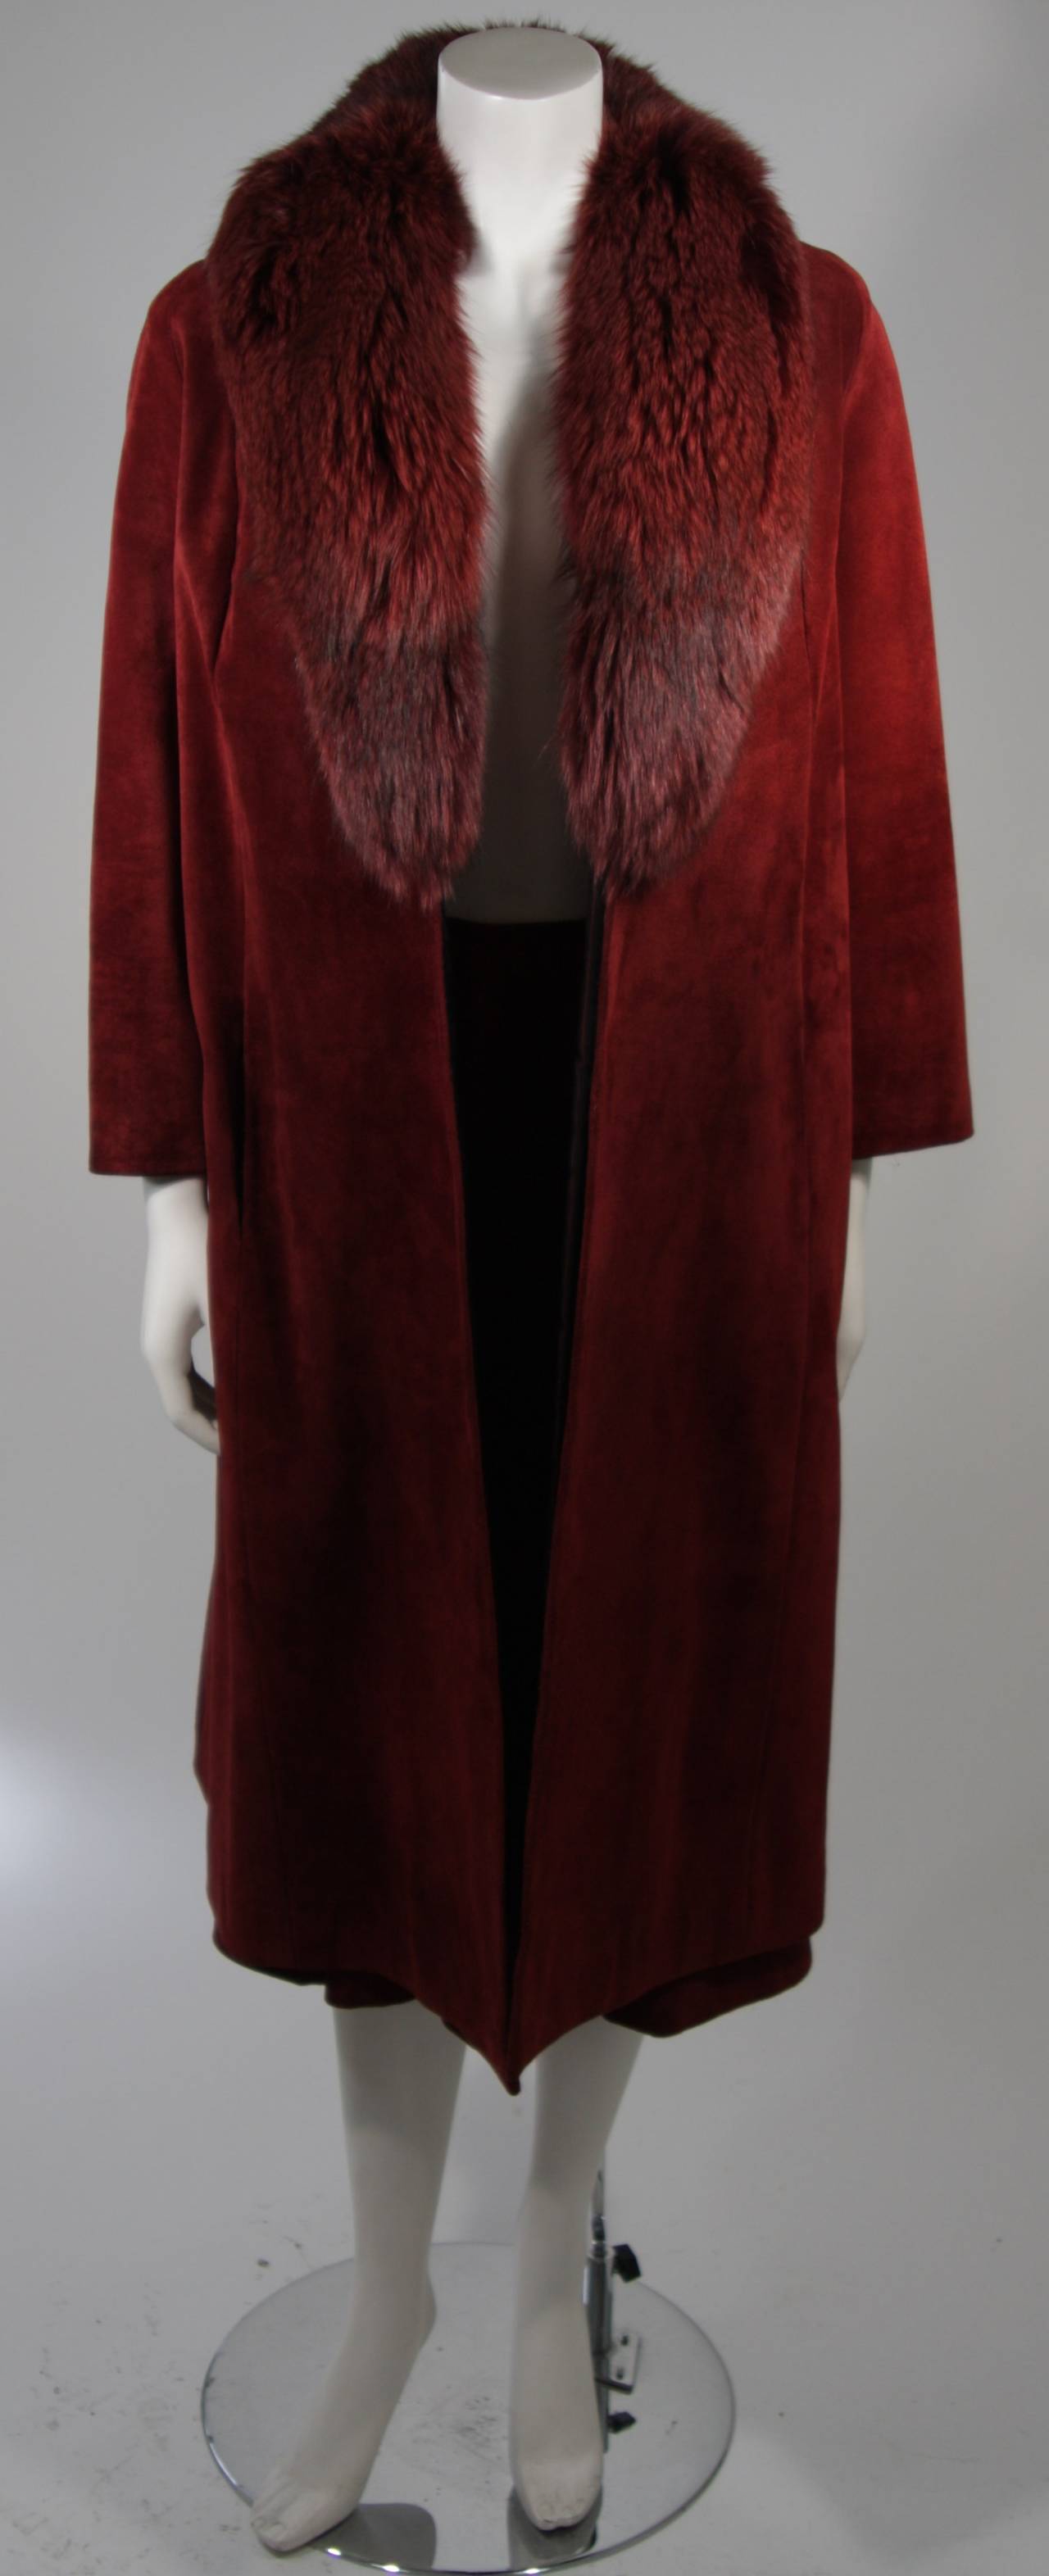 This Nolan Miller ensemble is available for viewing at our Beverly Hills Boutique. We offer a large selection of evening gowns and luxury garments.

This set is composed of a burgundy suede and fox fur collar. the coat is a fantastic trench style